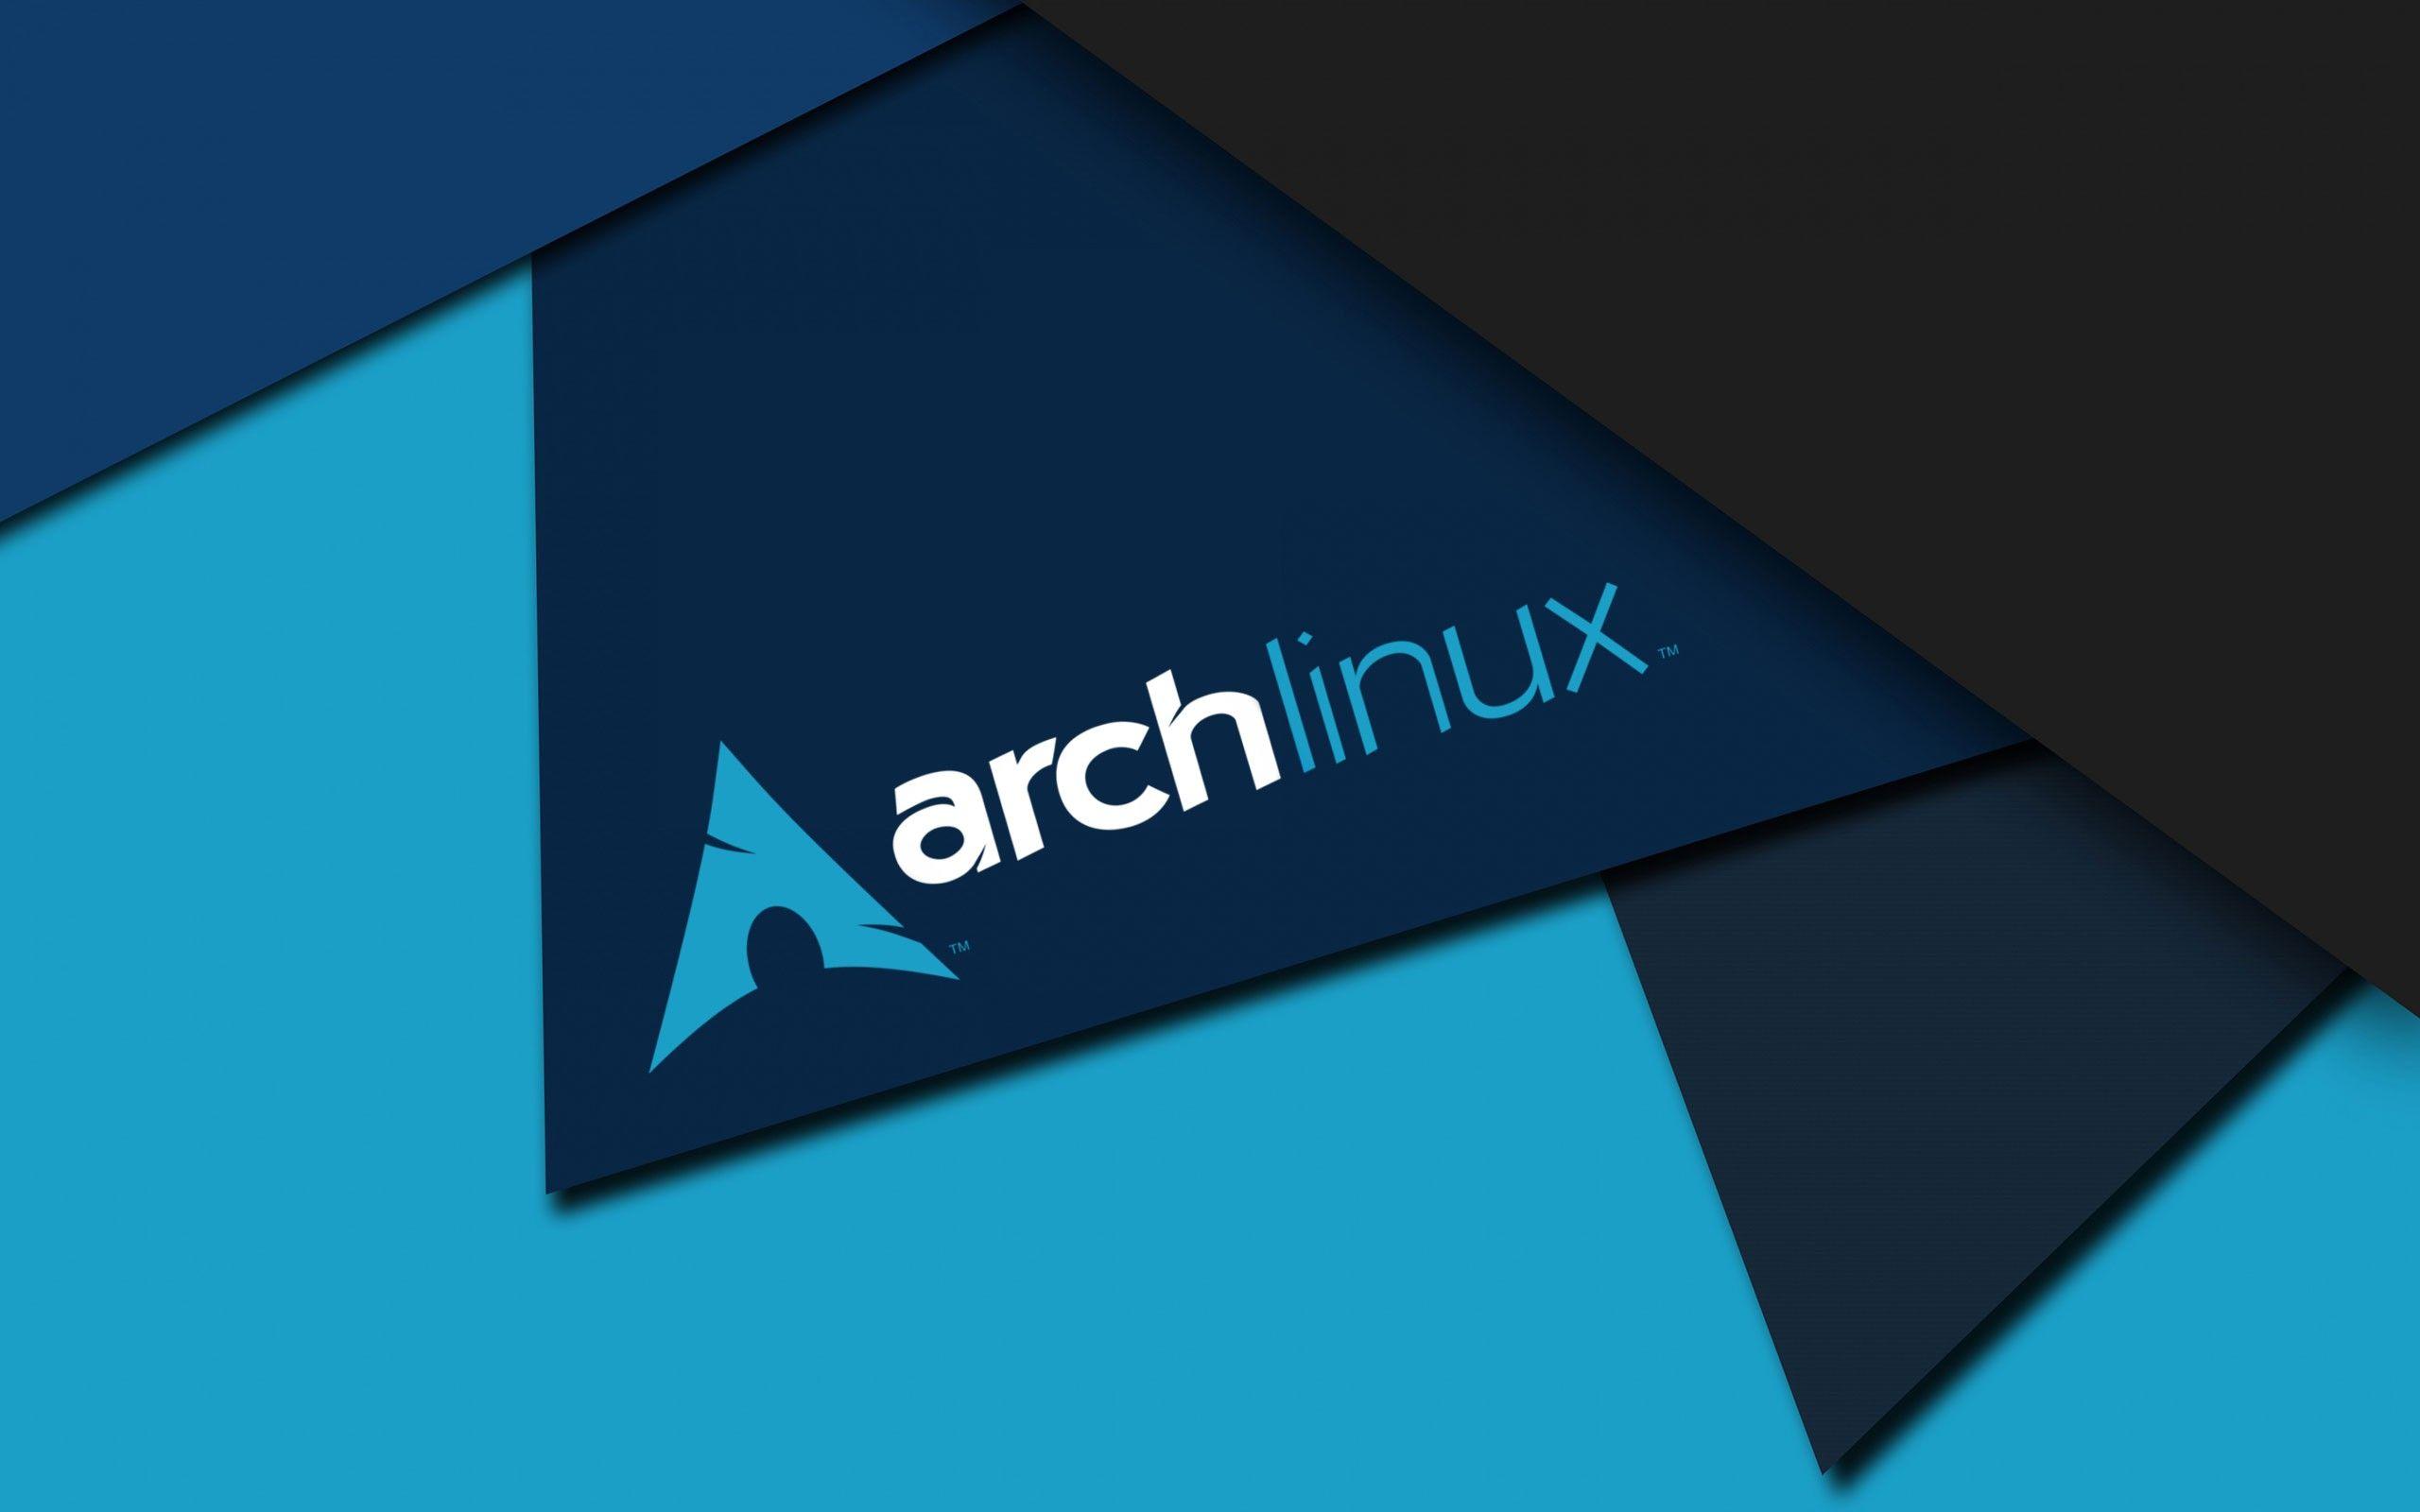 Arch Linux Wallpapers Top Free Arch Linux Backgrounds Images, Photos, Reviews